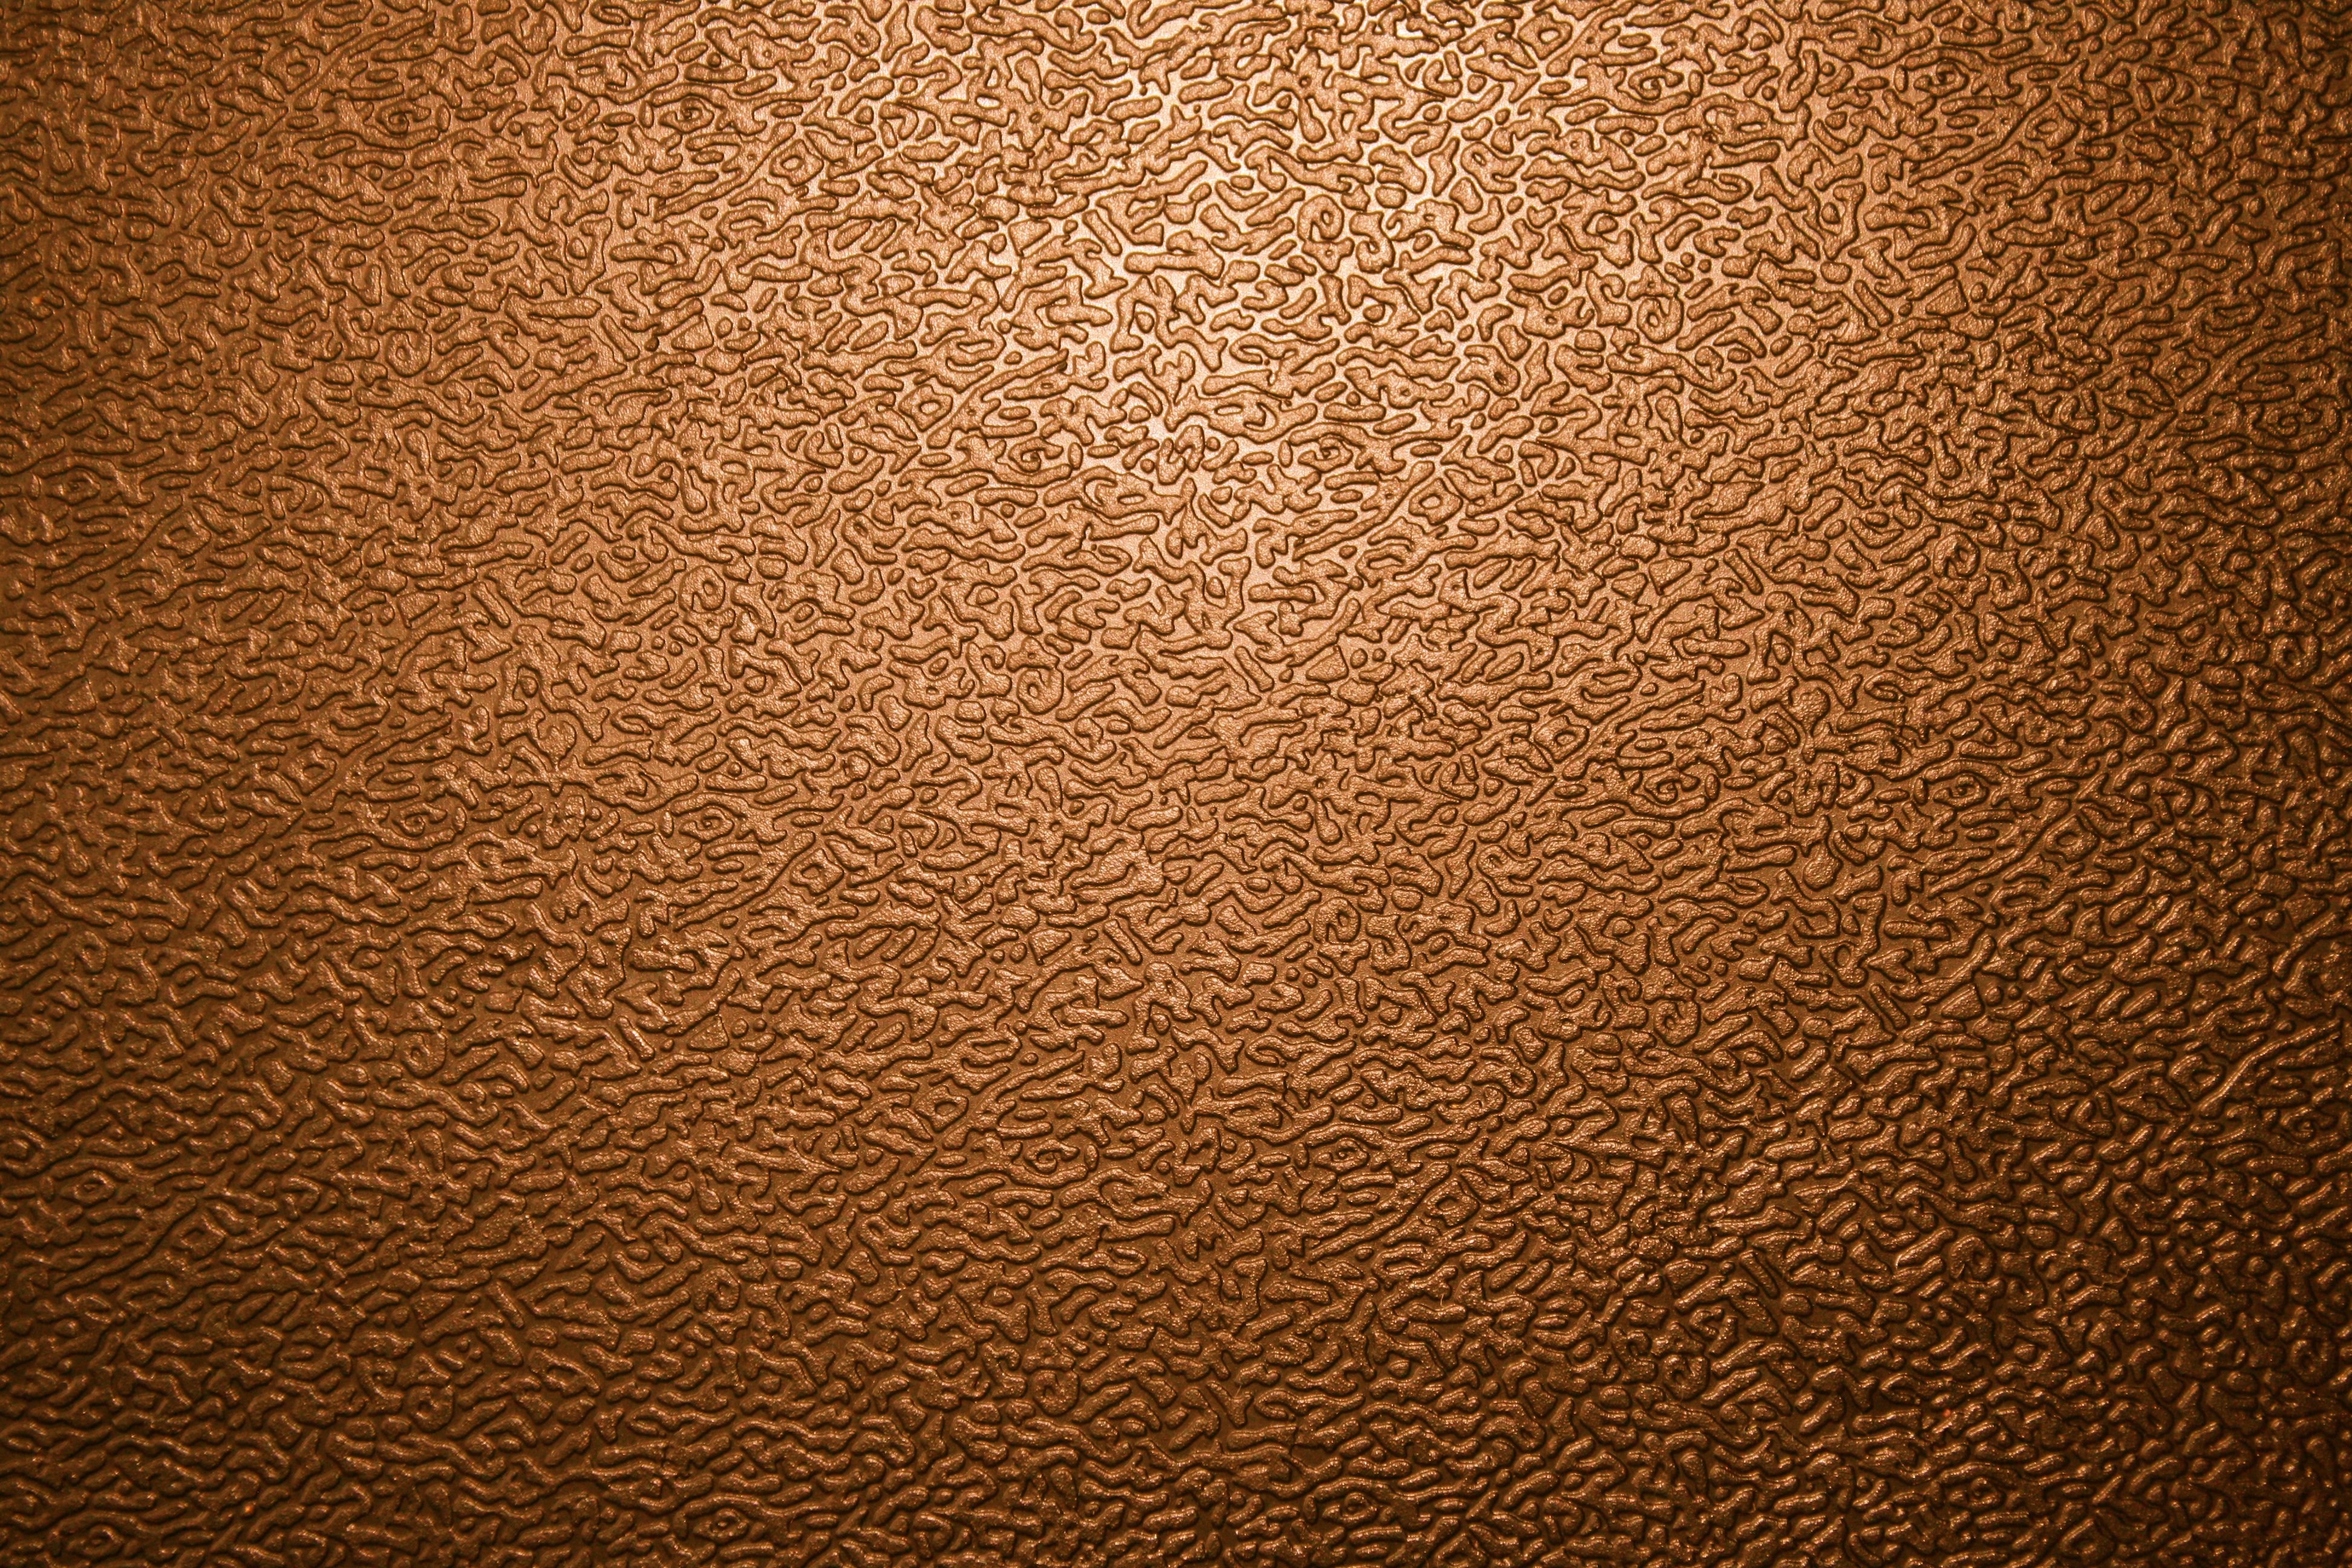 Textured Brown Plastic Close Up Picture Photograph Photos